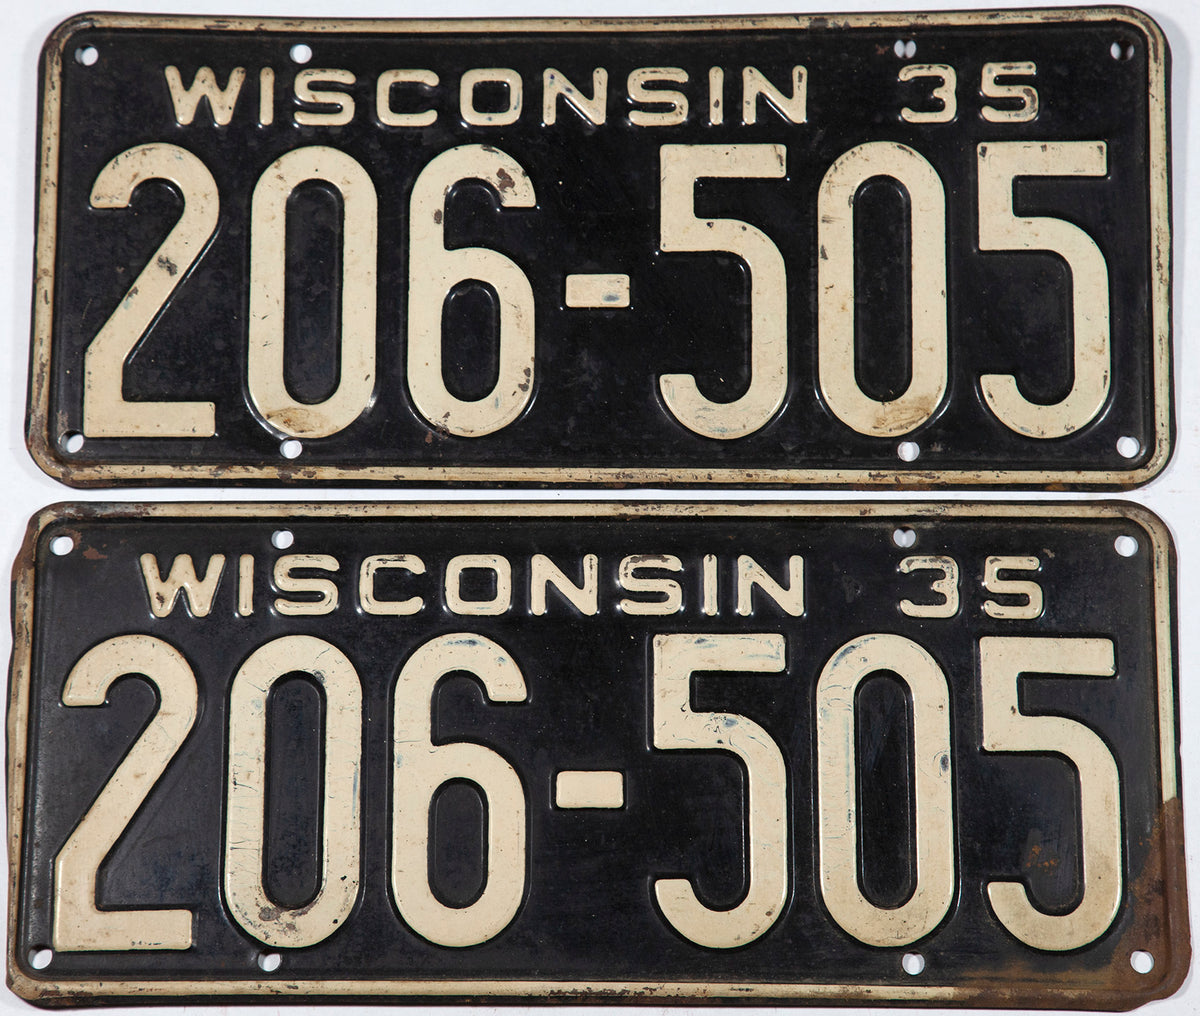 1935 Wisconsin car license plates in very good condition